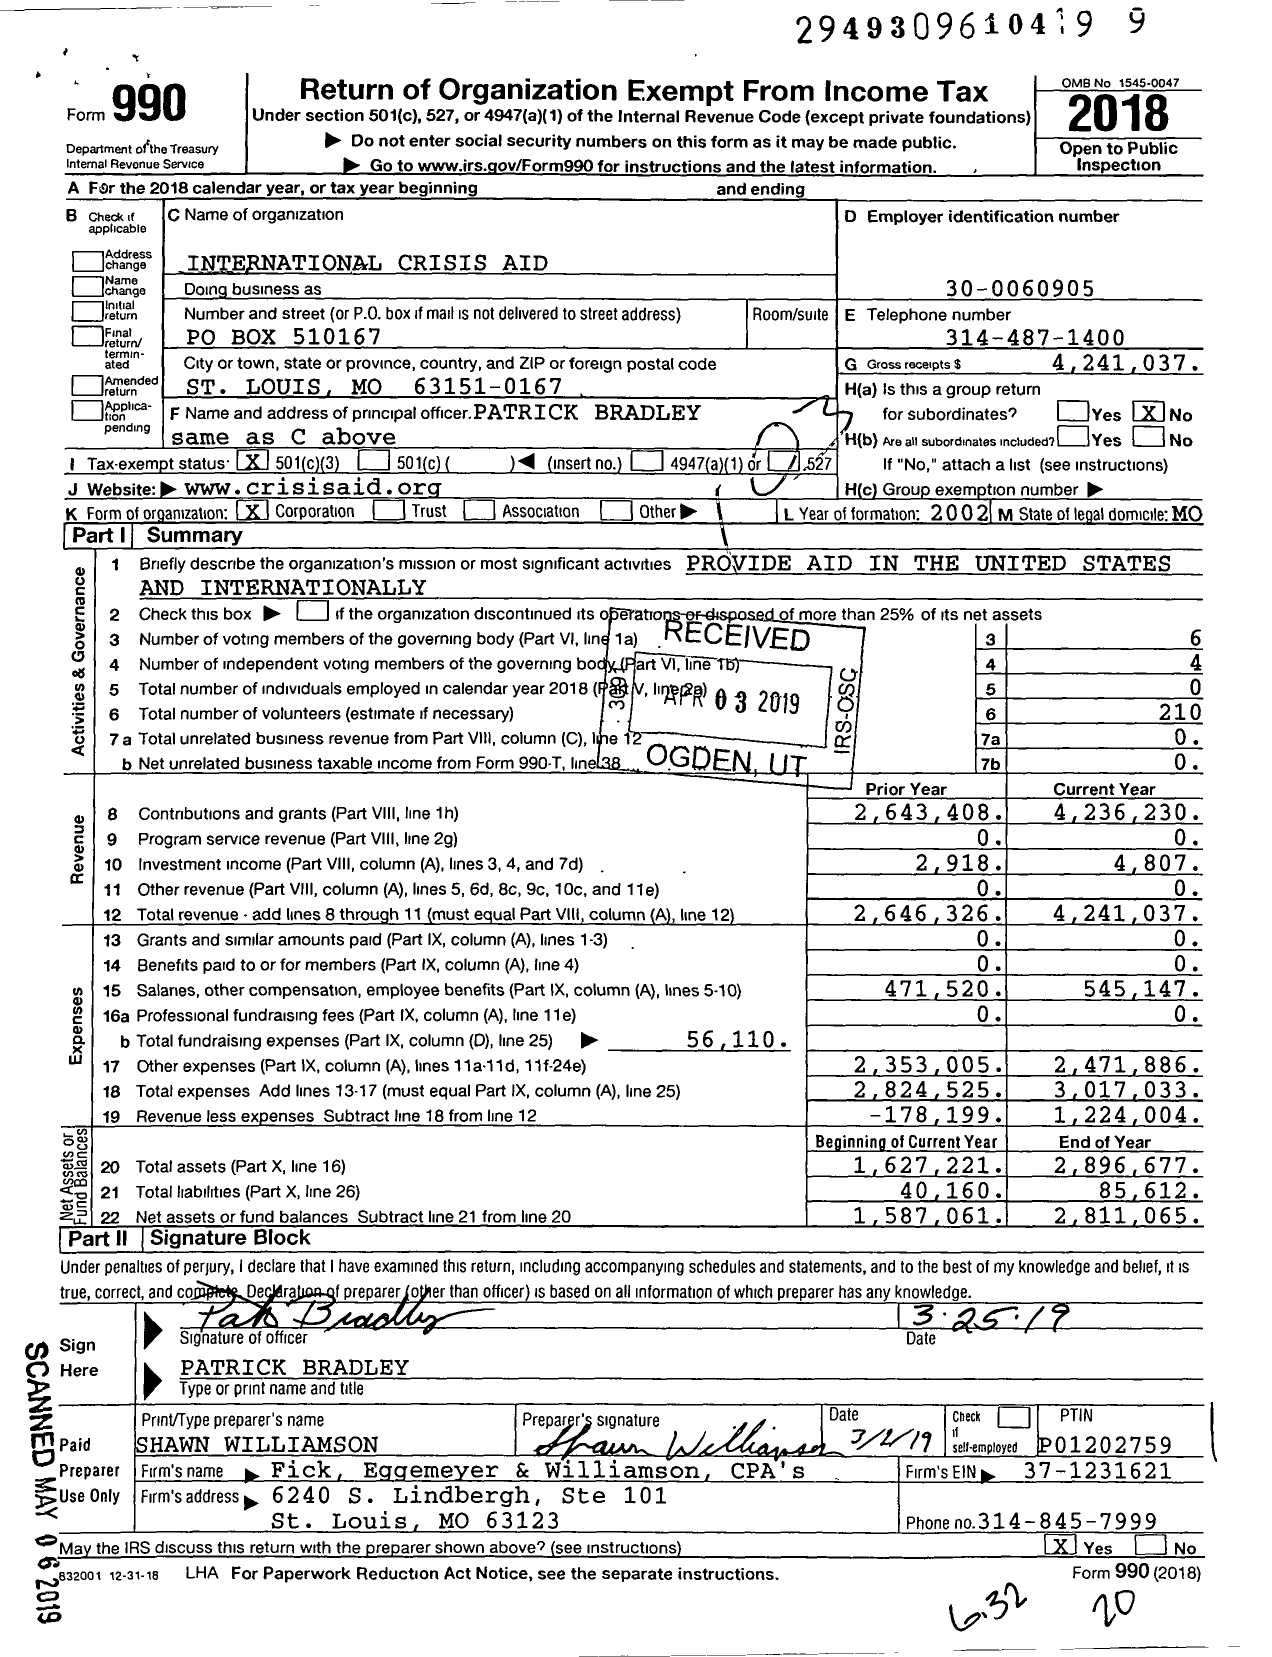 Image of first page of 2018 Form 990 for International Crisis Aid